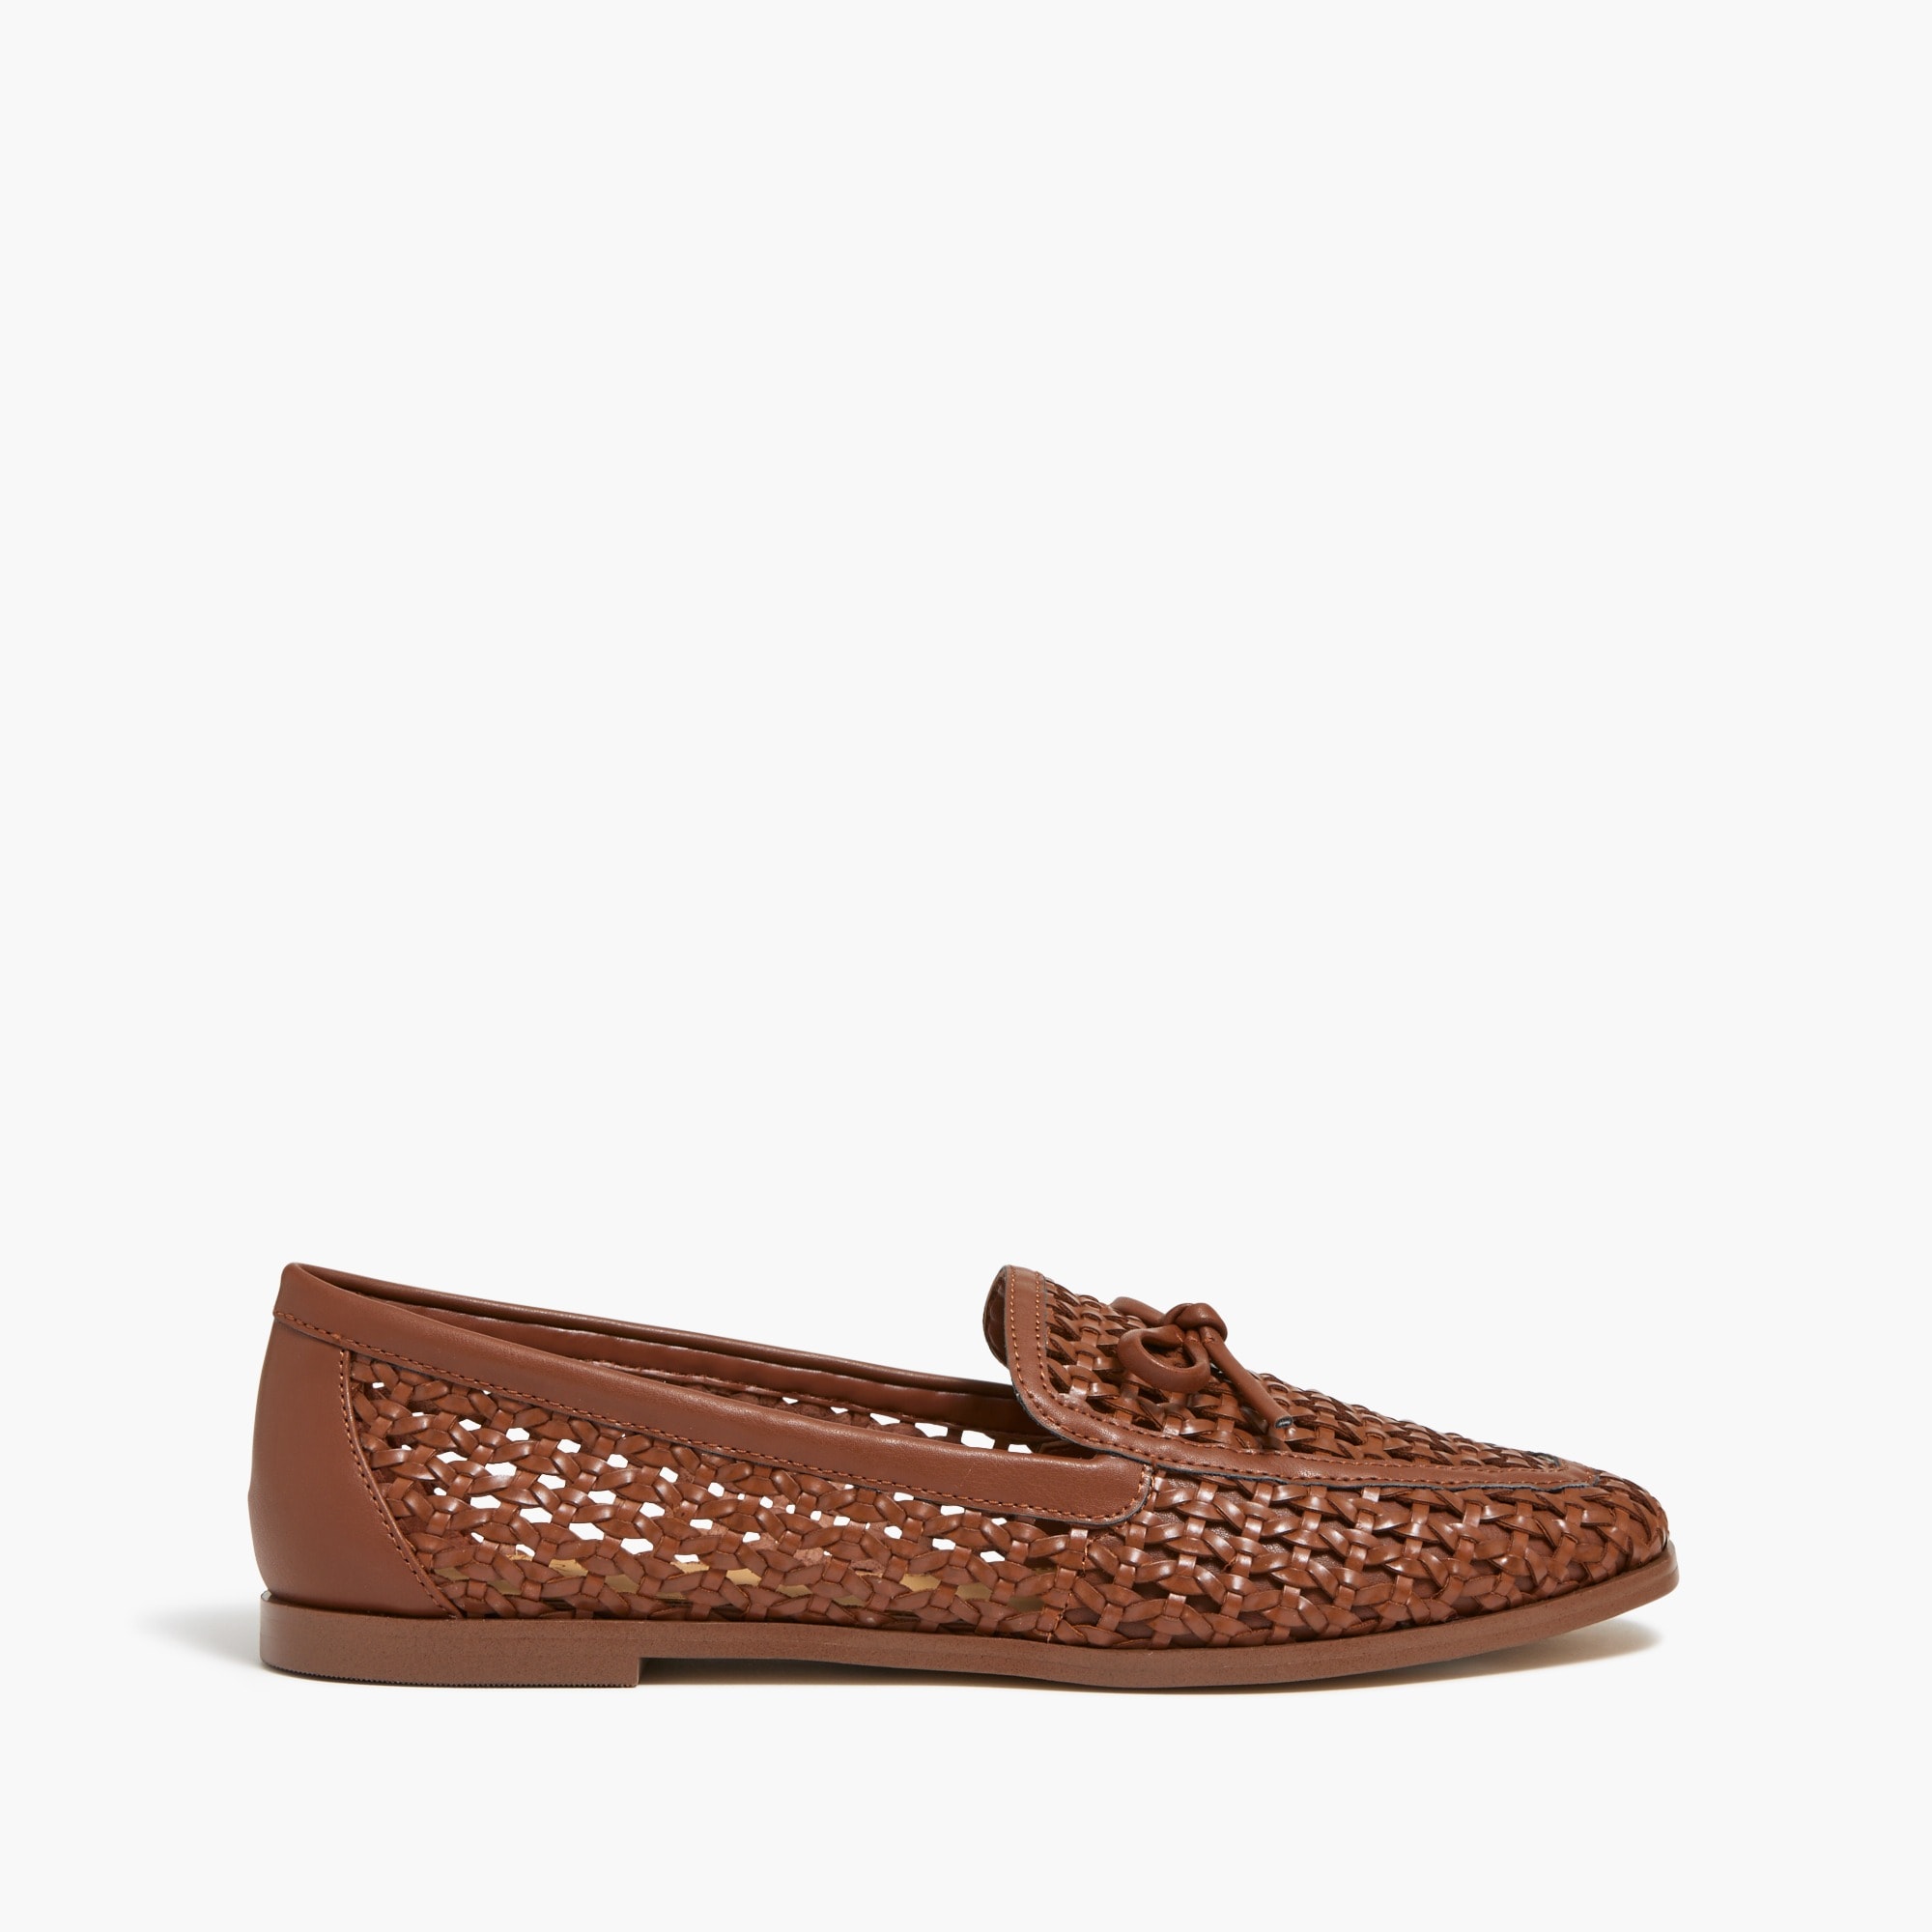 Woven bow loafers